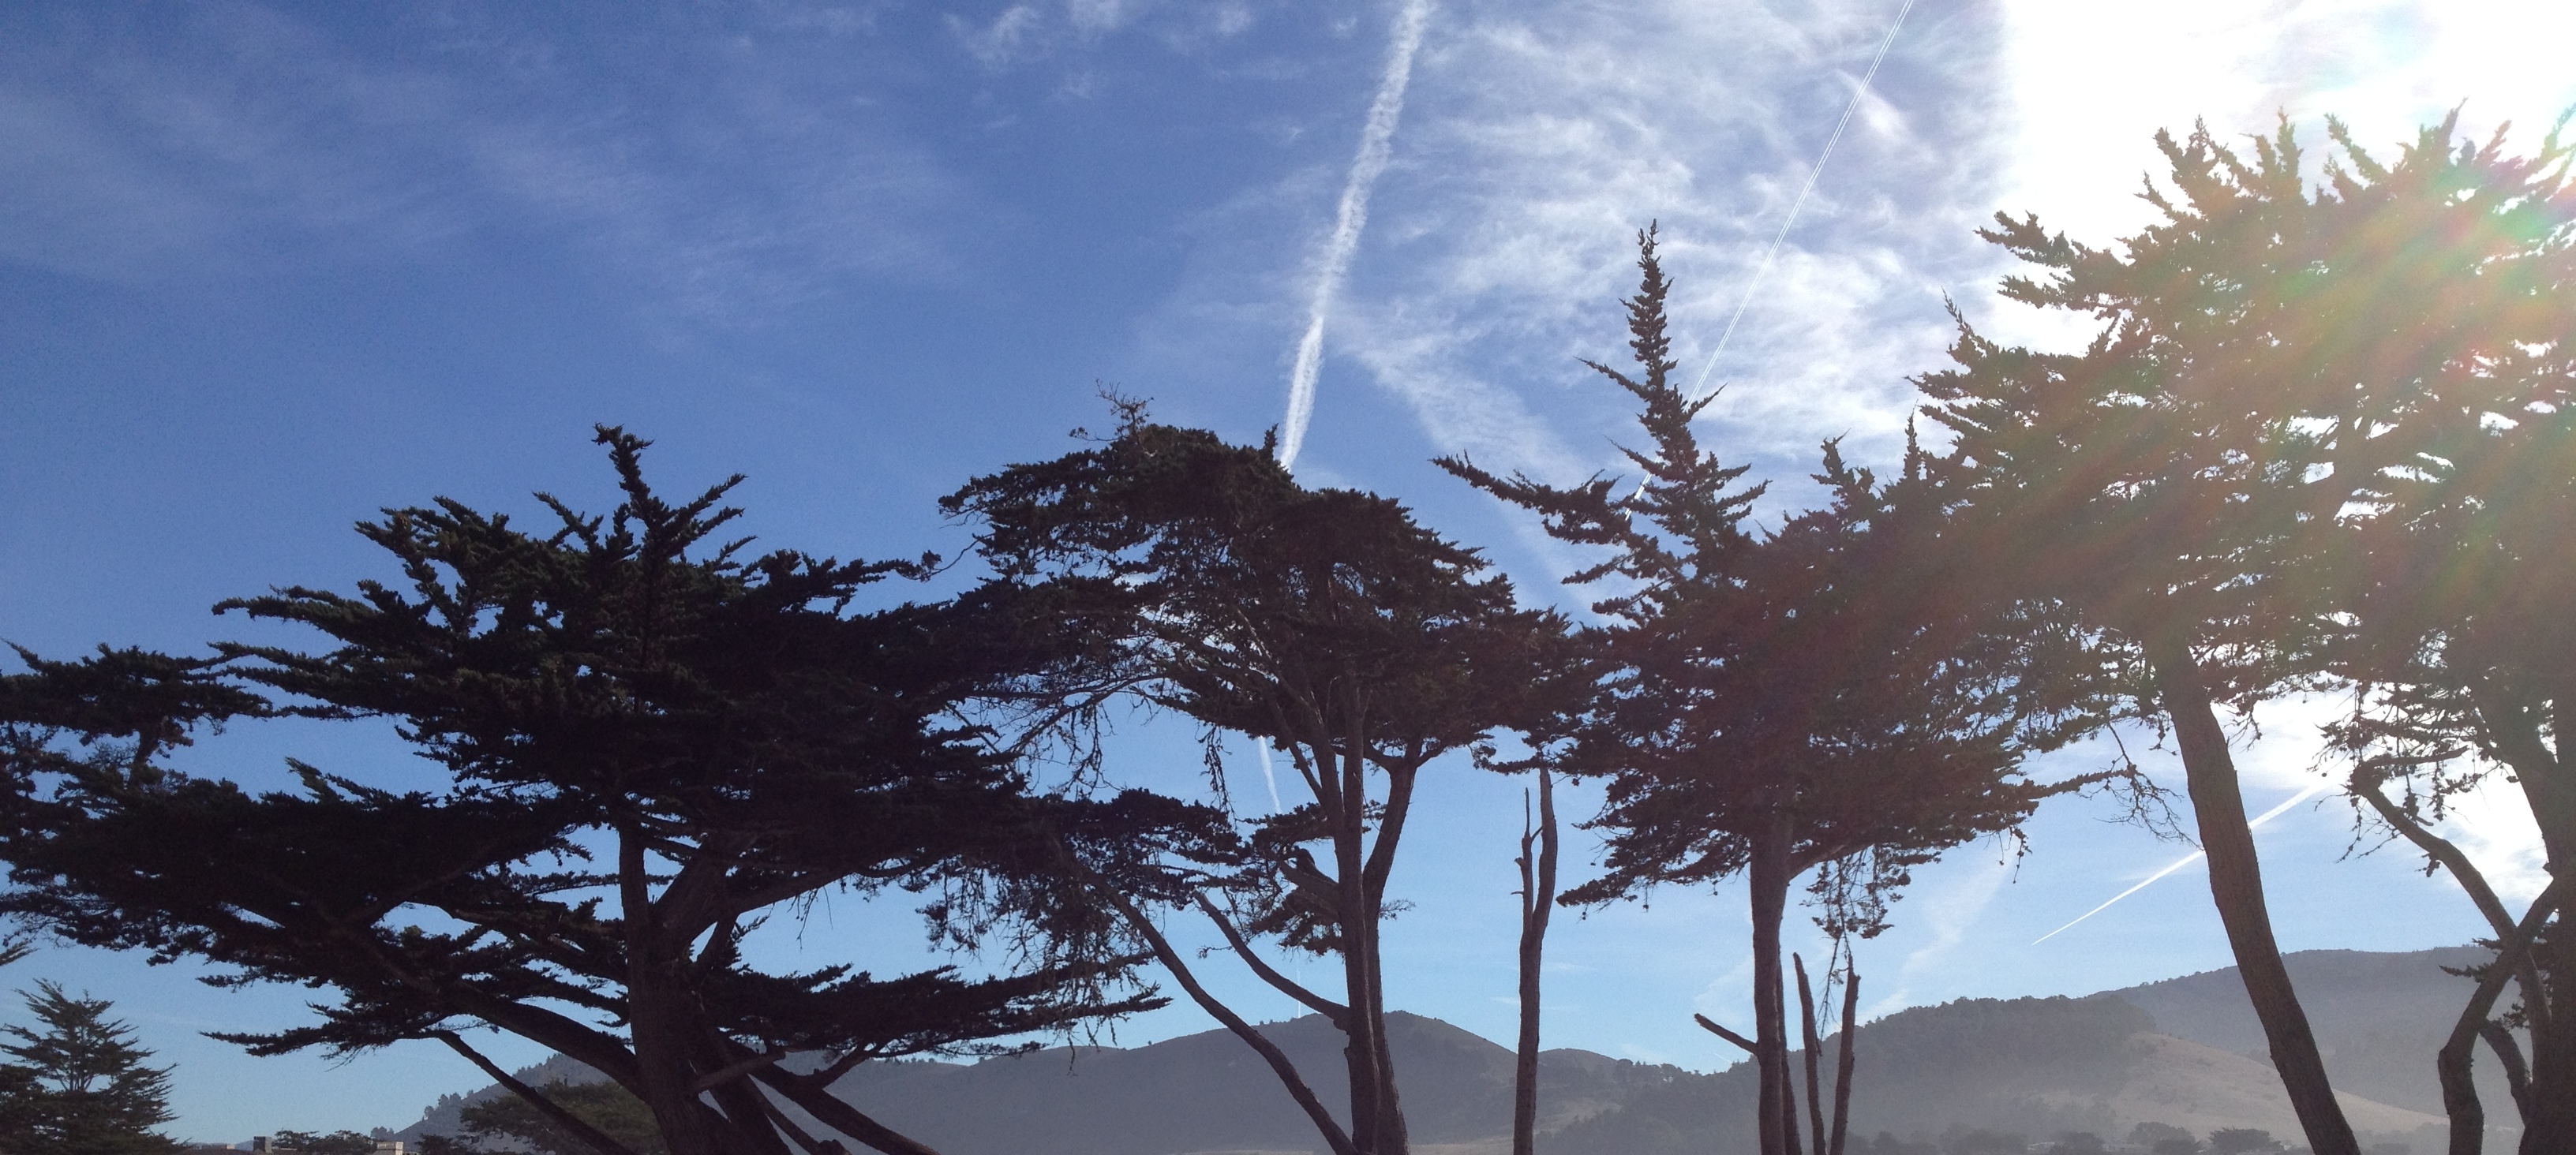 Pacific Grove Treetops in the Sun